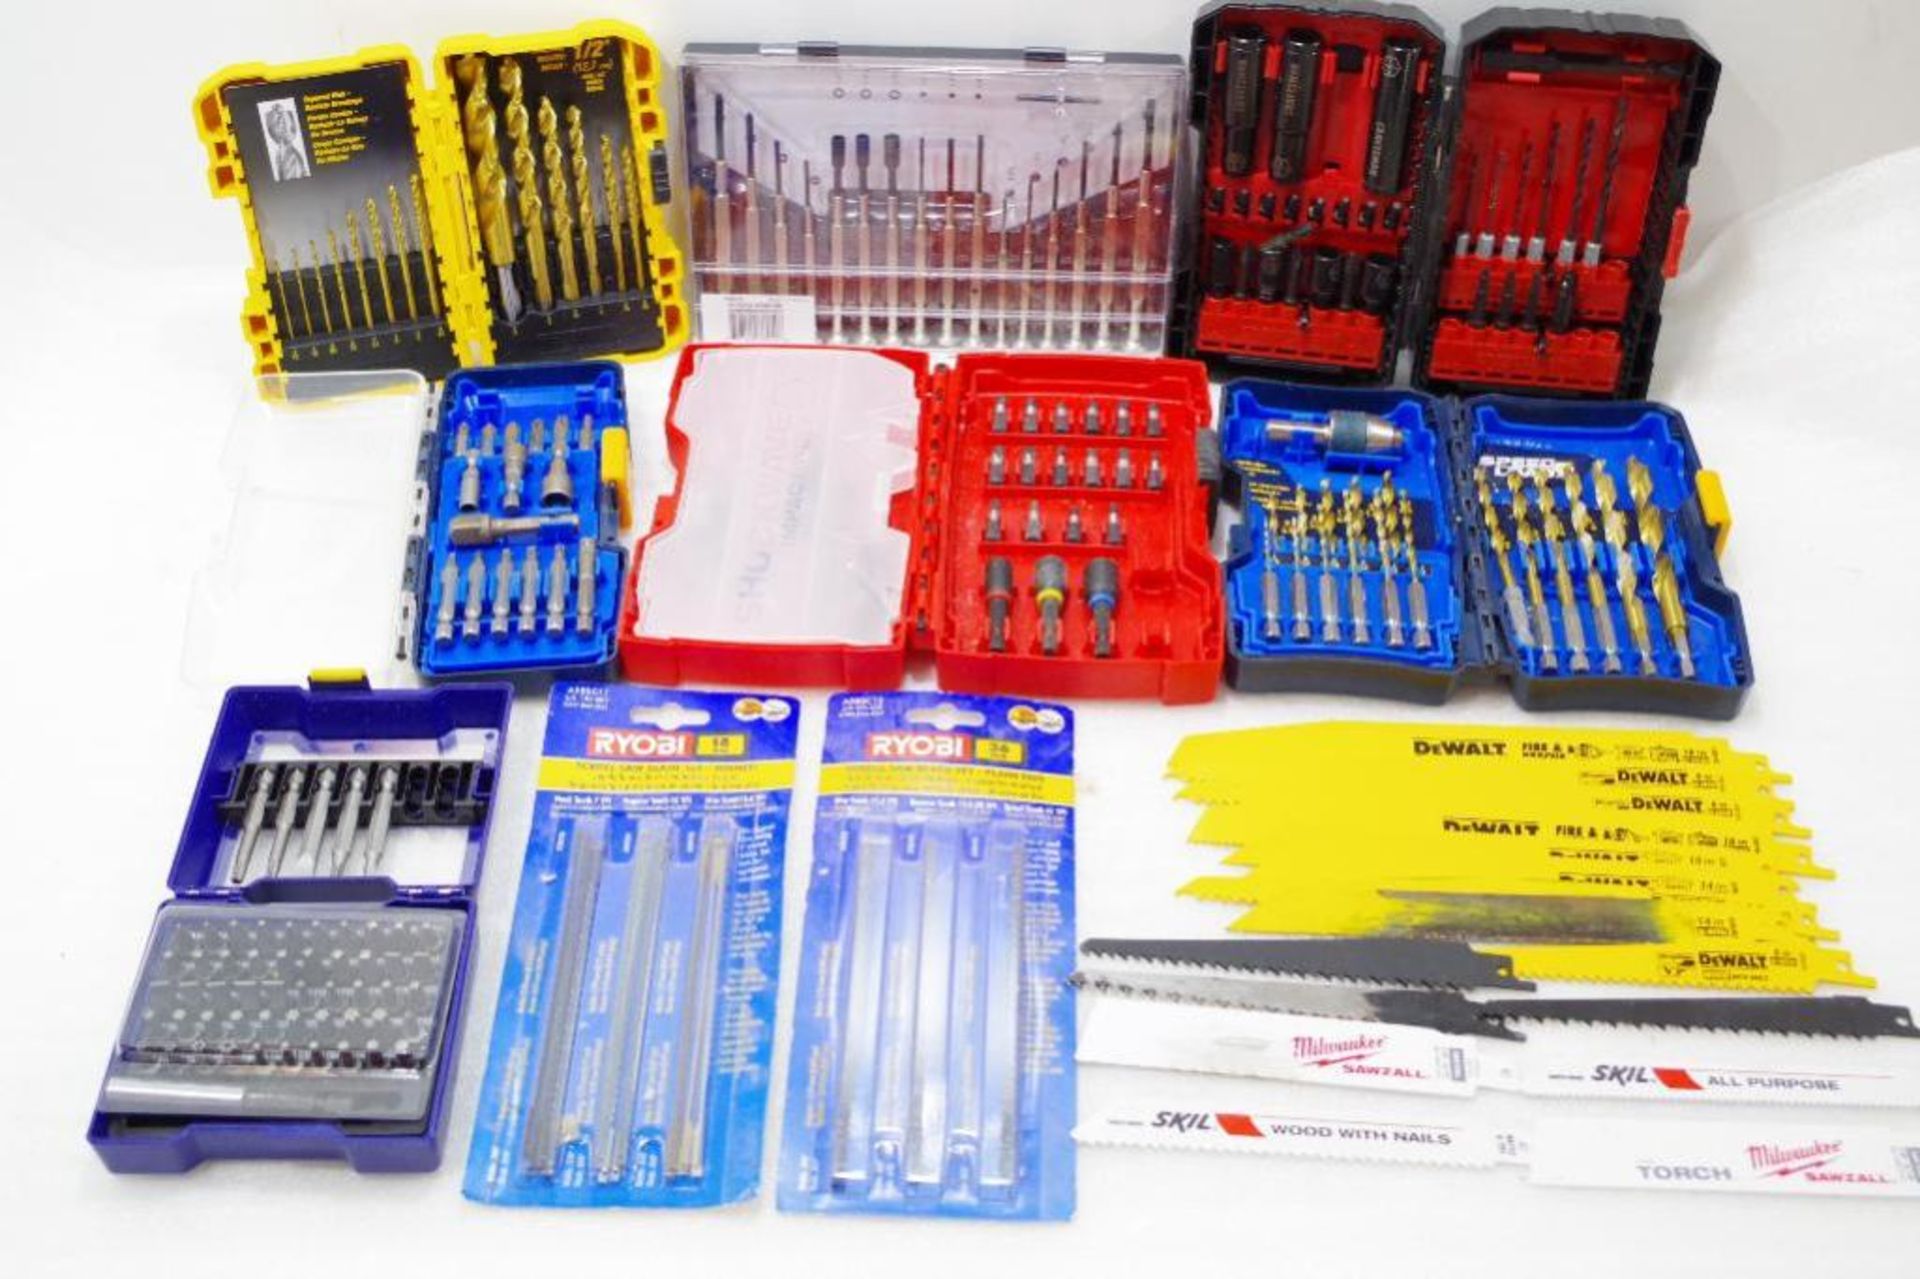 (10) Tool Sets: Drill Bits, Screw Drivers, Blade Sets & Reciprocating Saw Blades (Some New & Used)